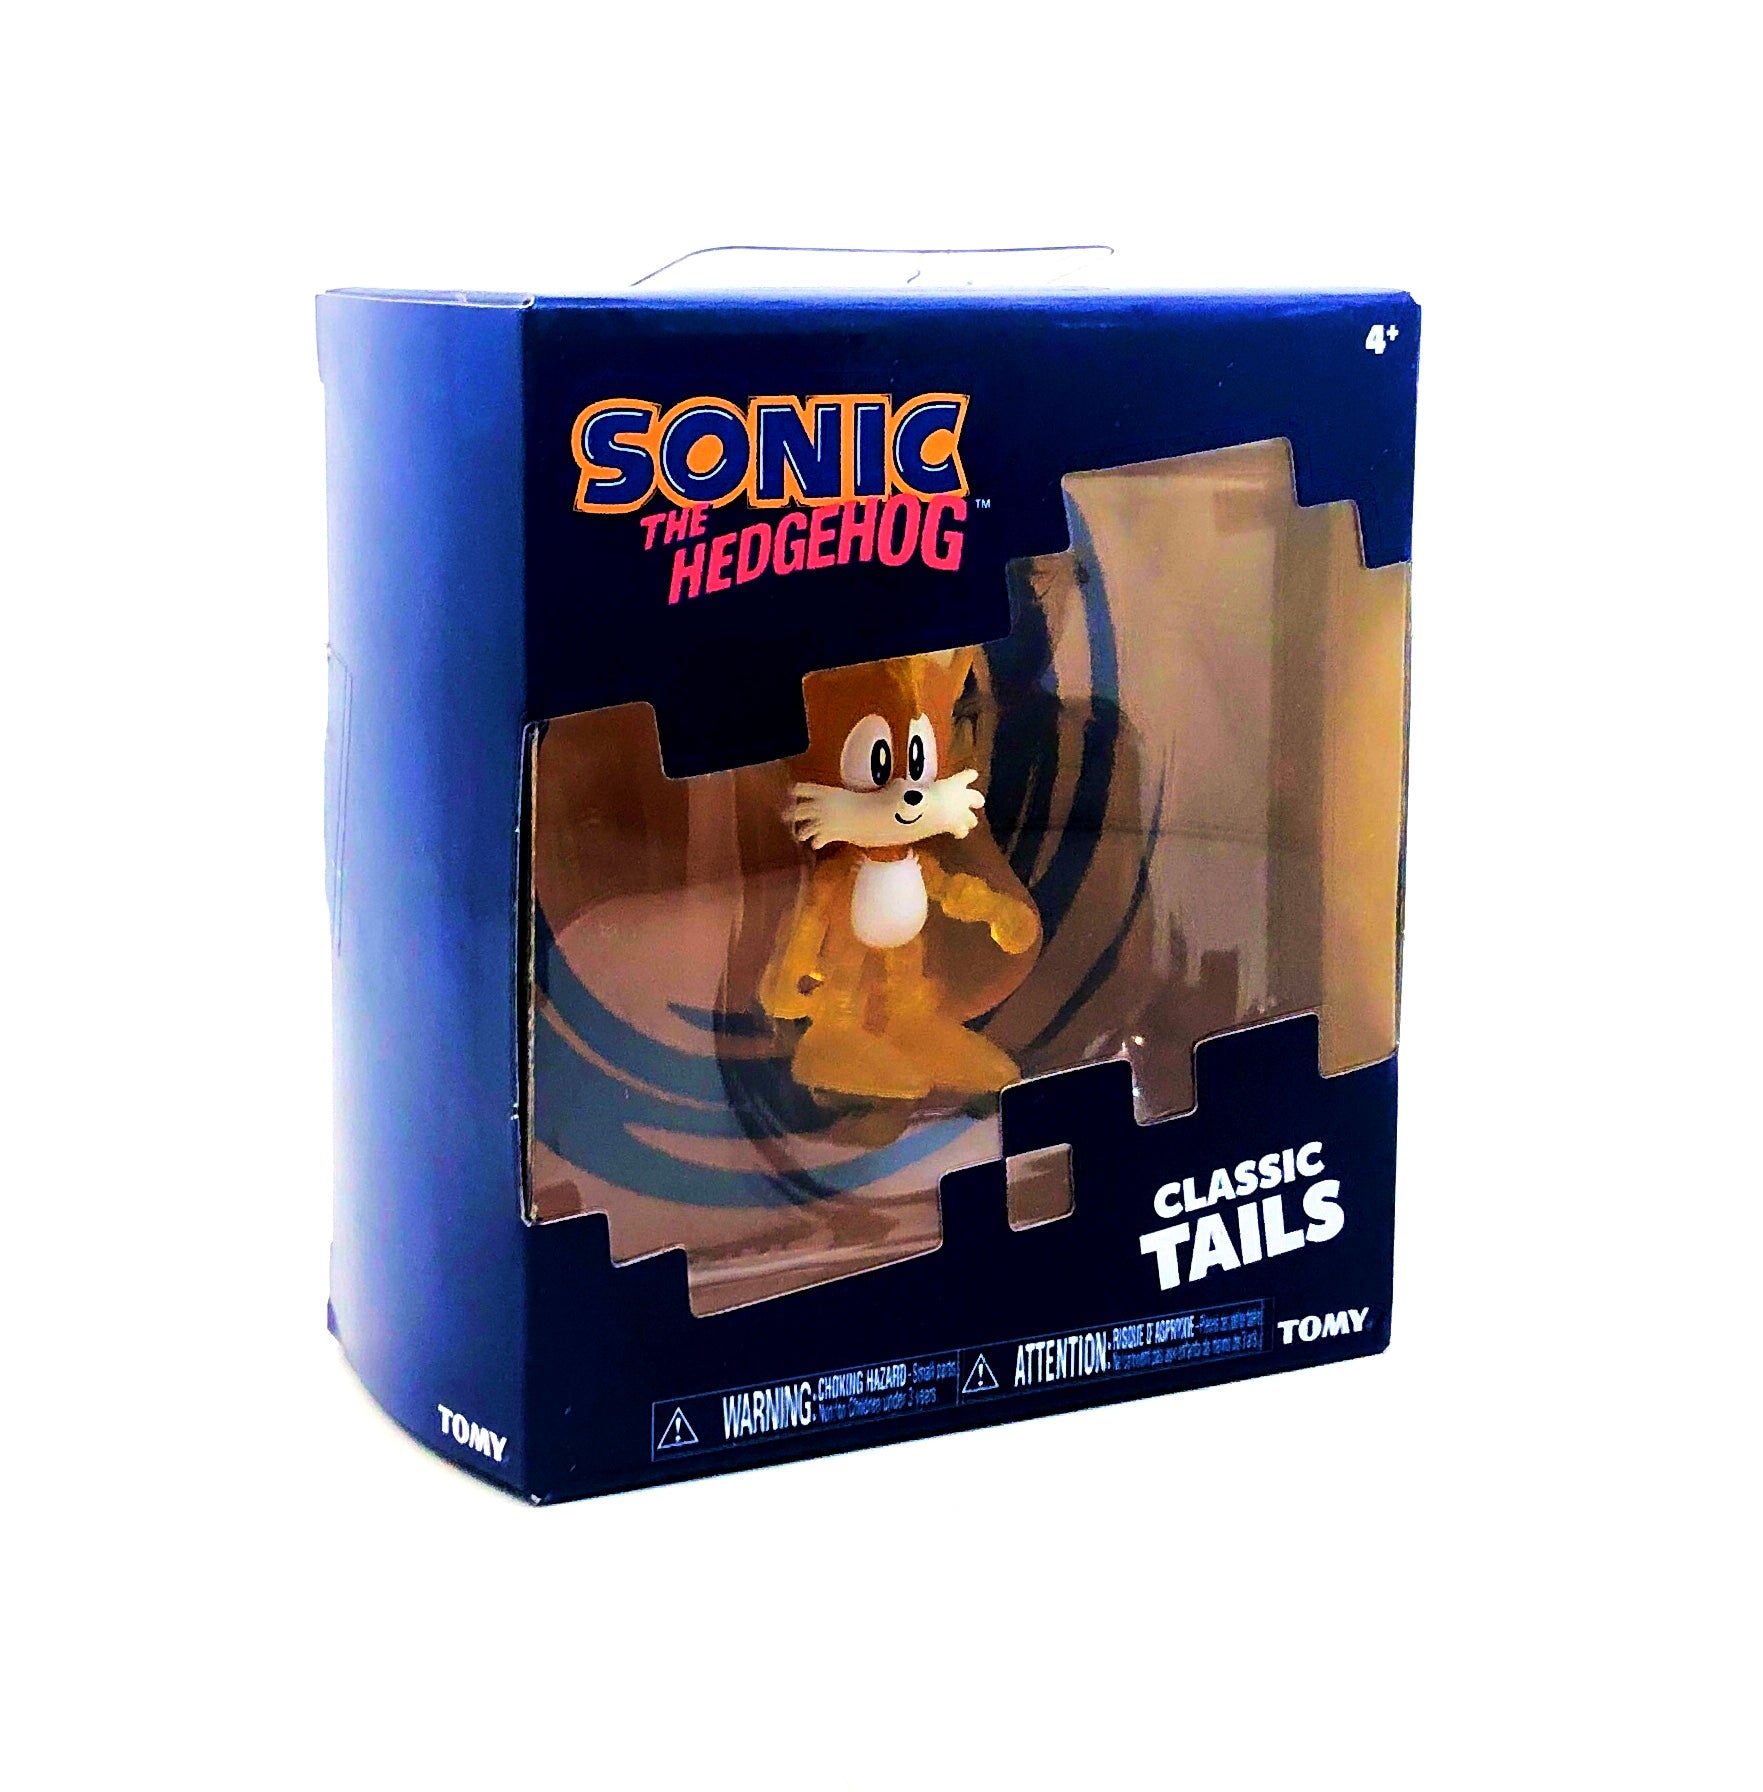 Sonic the Hedgehog: Classic Tails (Tomy)